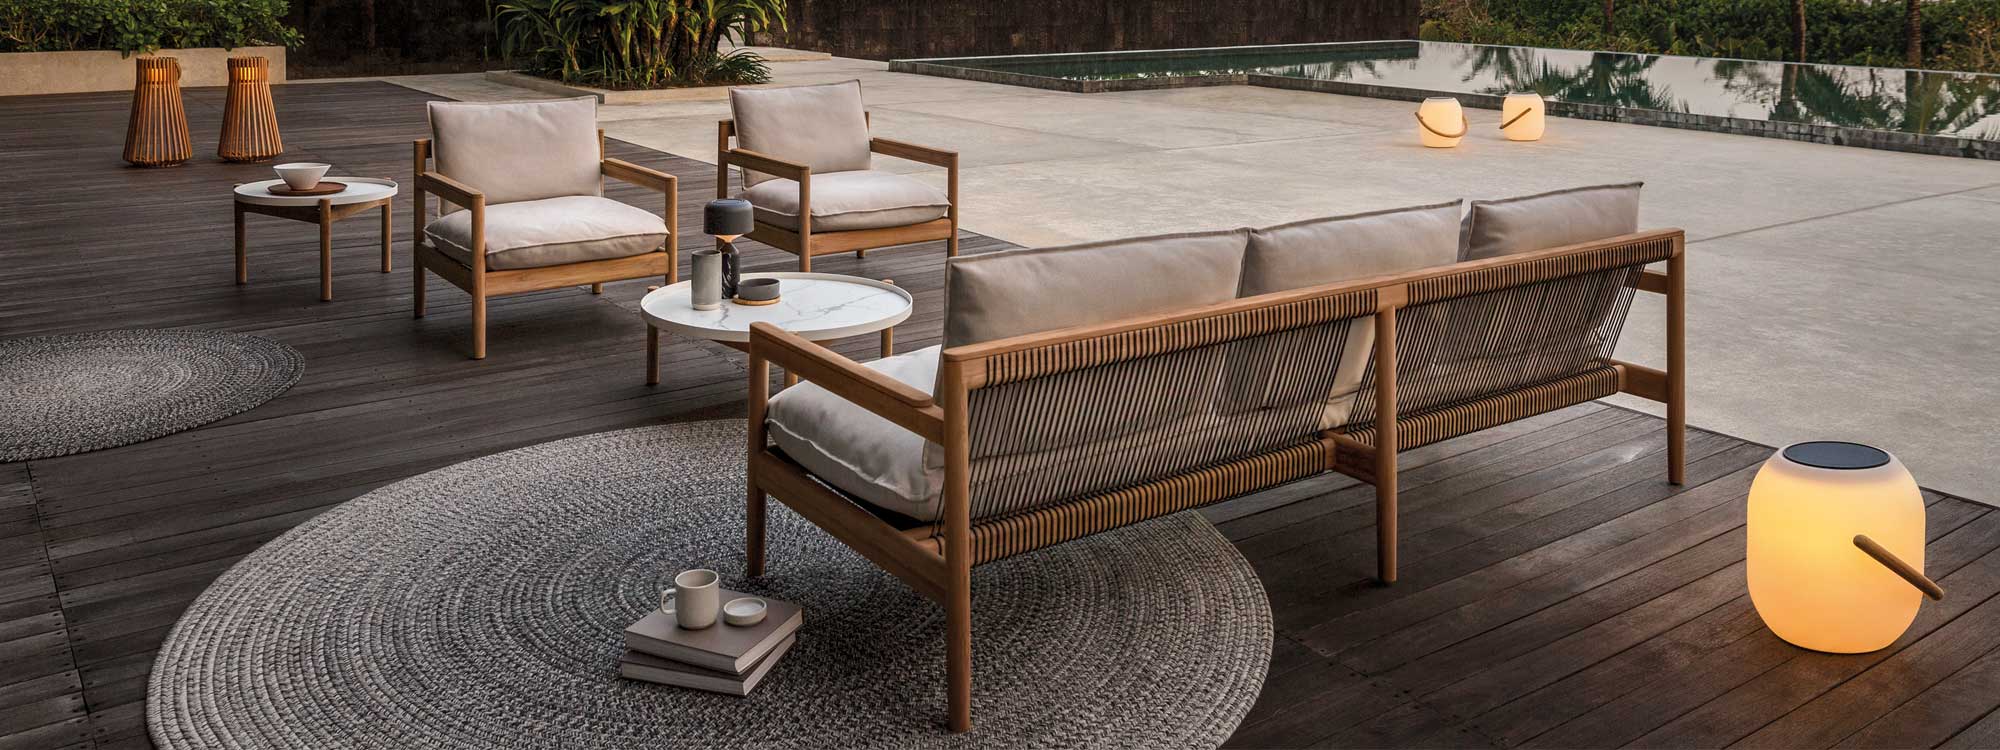 Image of Gloster Saranac 3 seater teak sofa and lounge chairs, together with Sepal exterior low tables